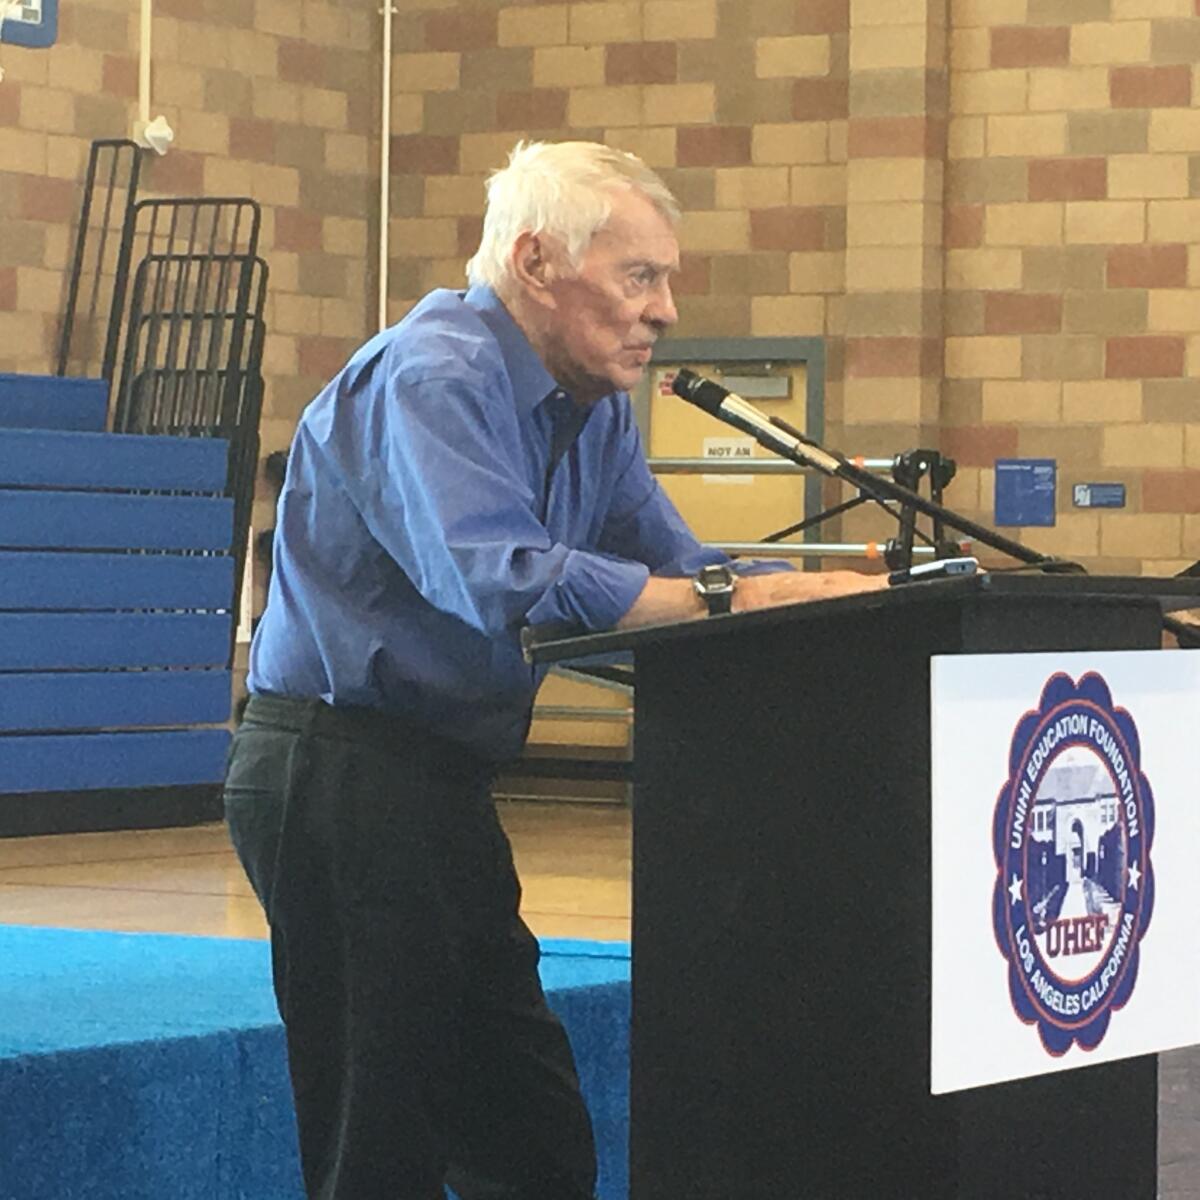 Former University cross country/track Coach Dick Kampmann was honored at a luncheon on Sunday.